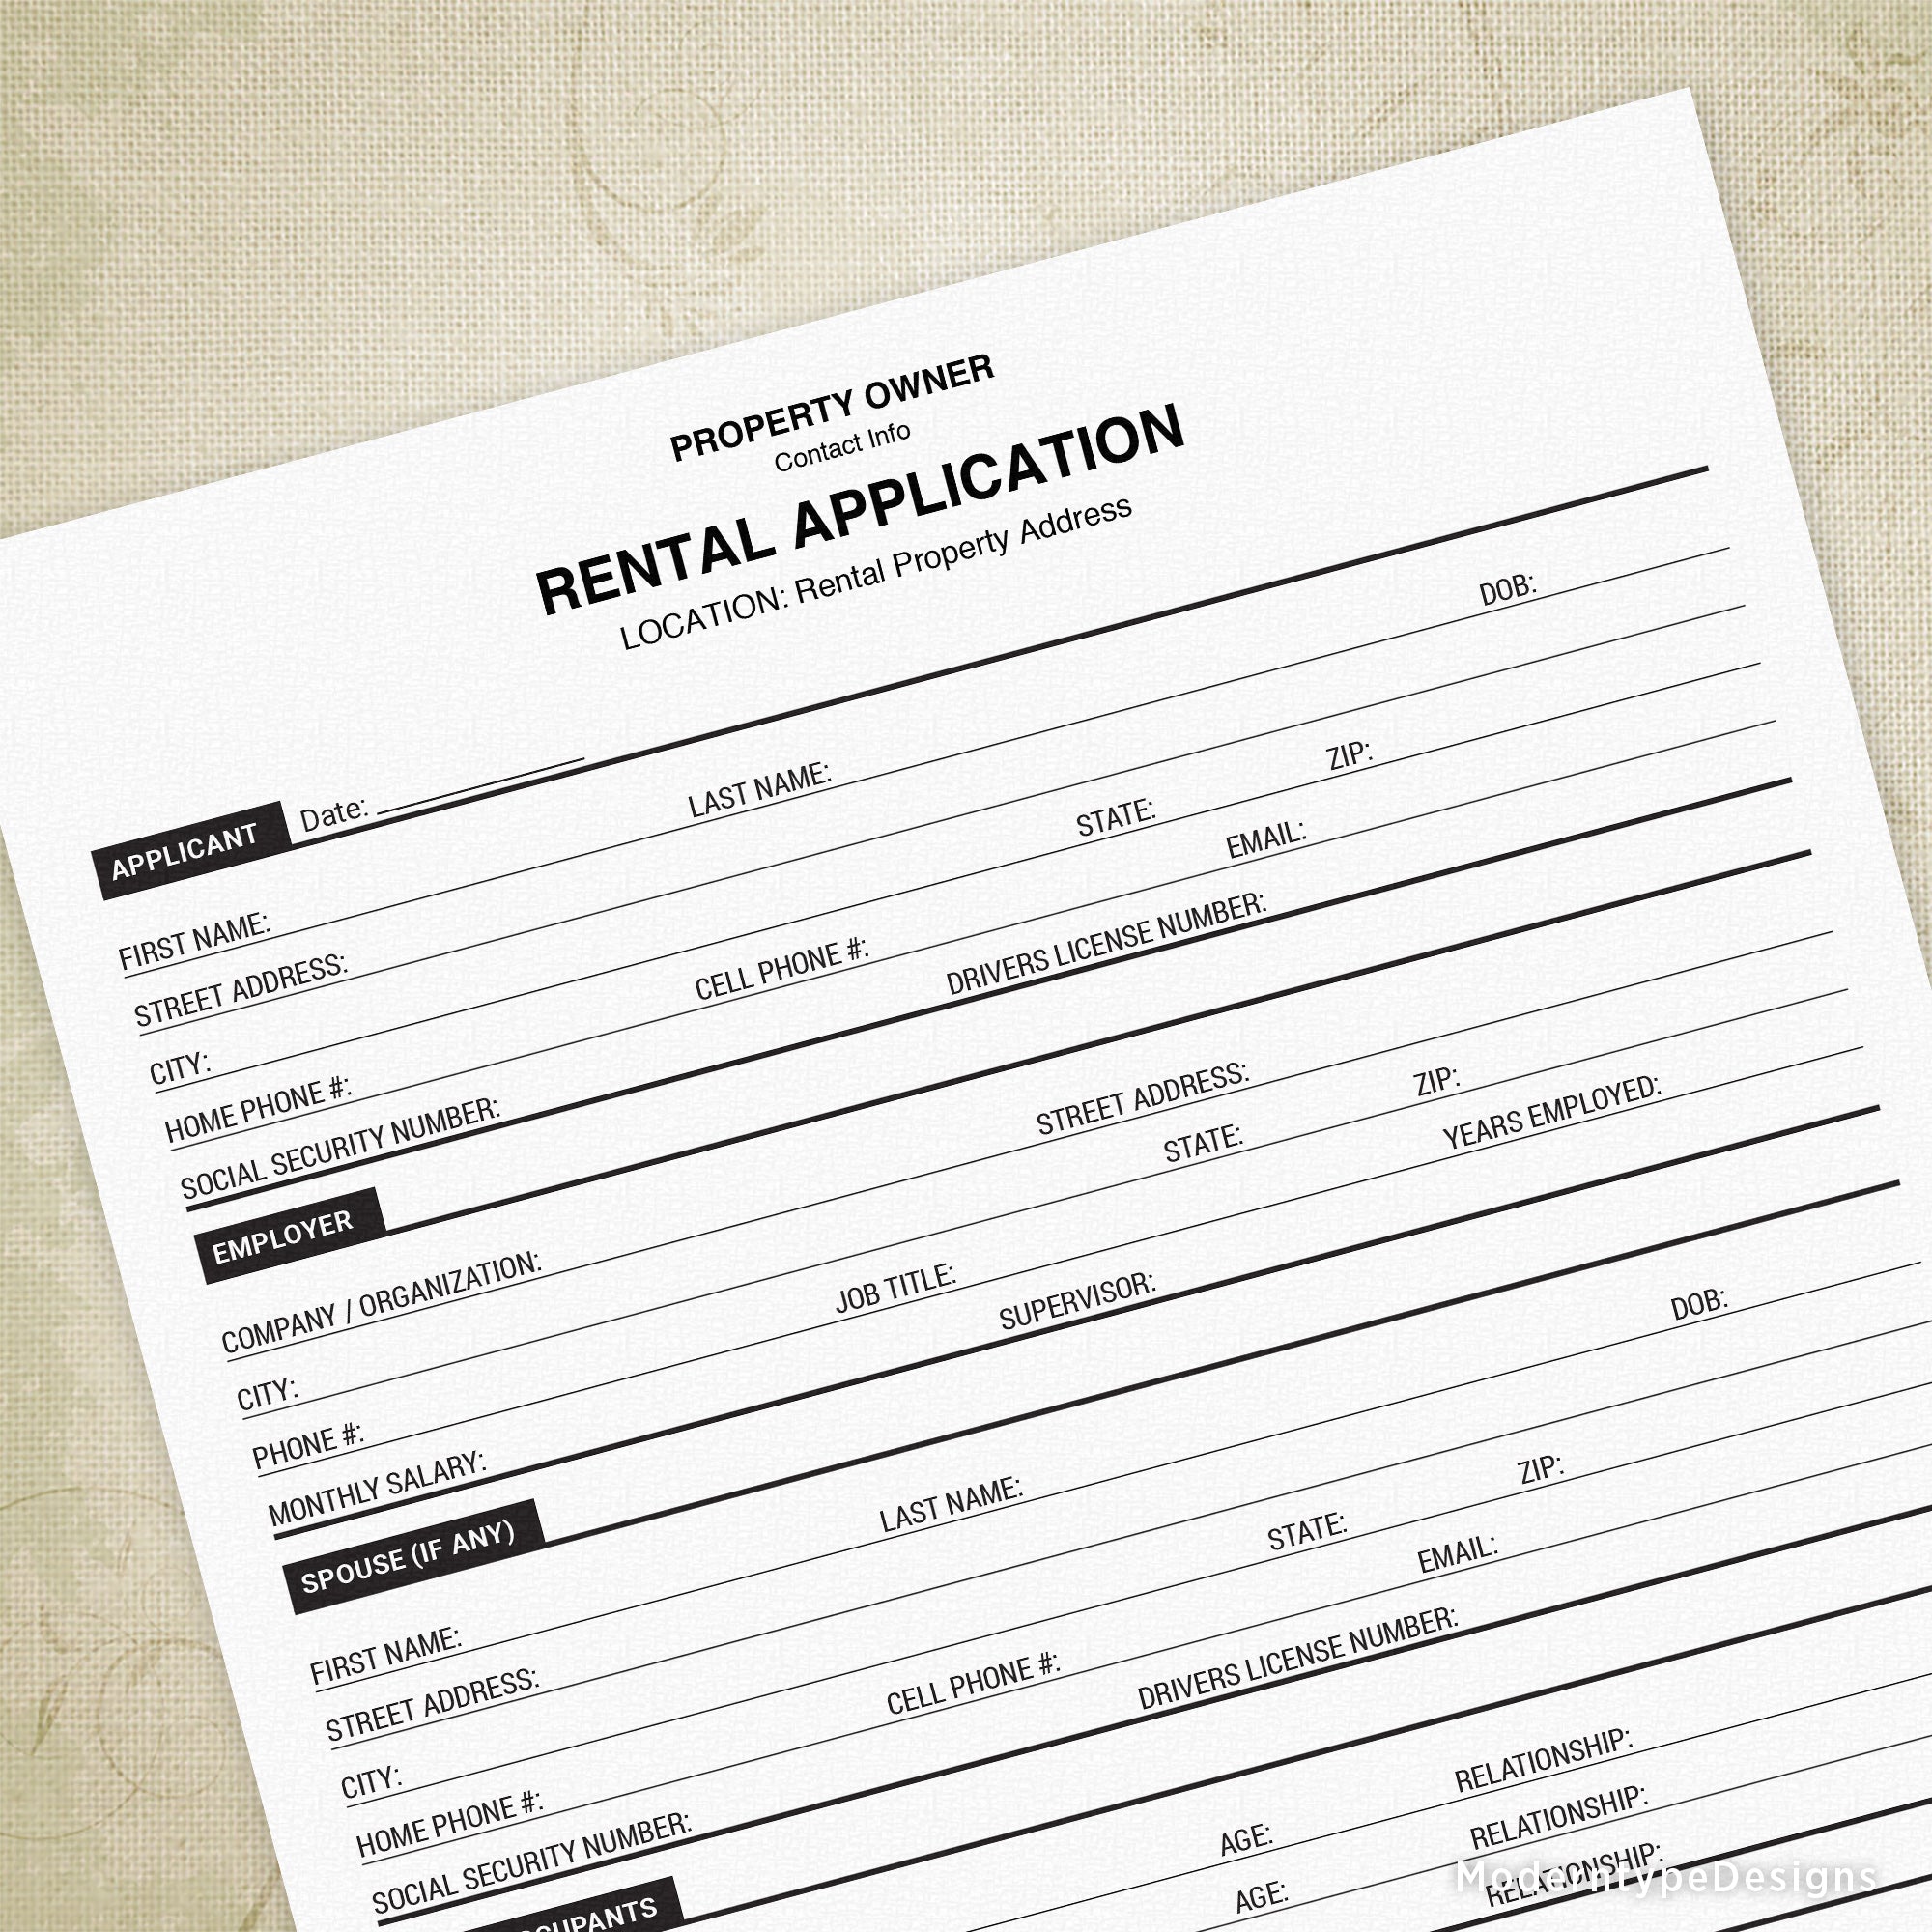 Rental Property Application Printable, Personalized